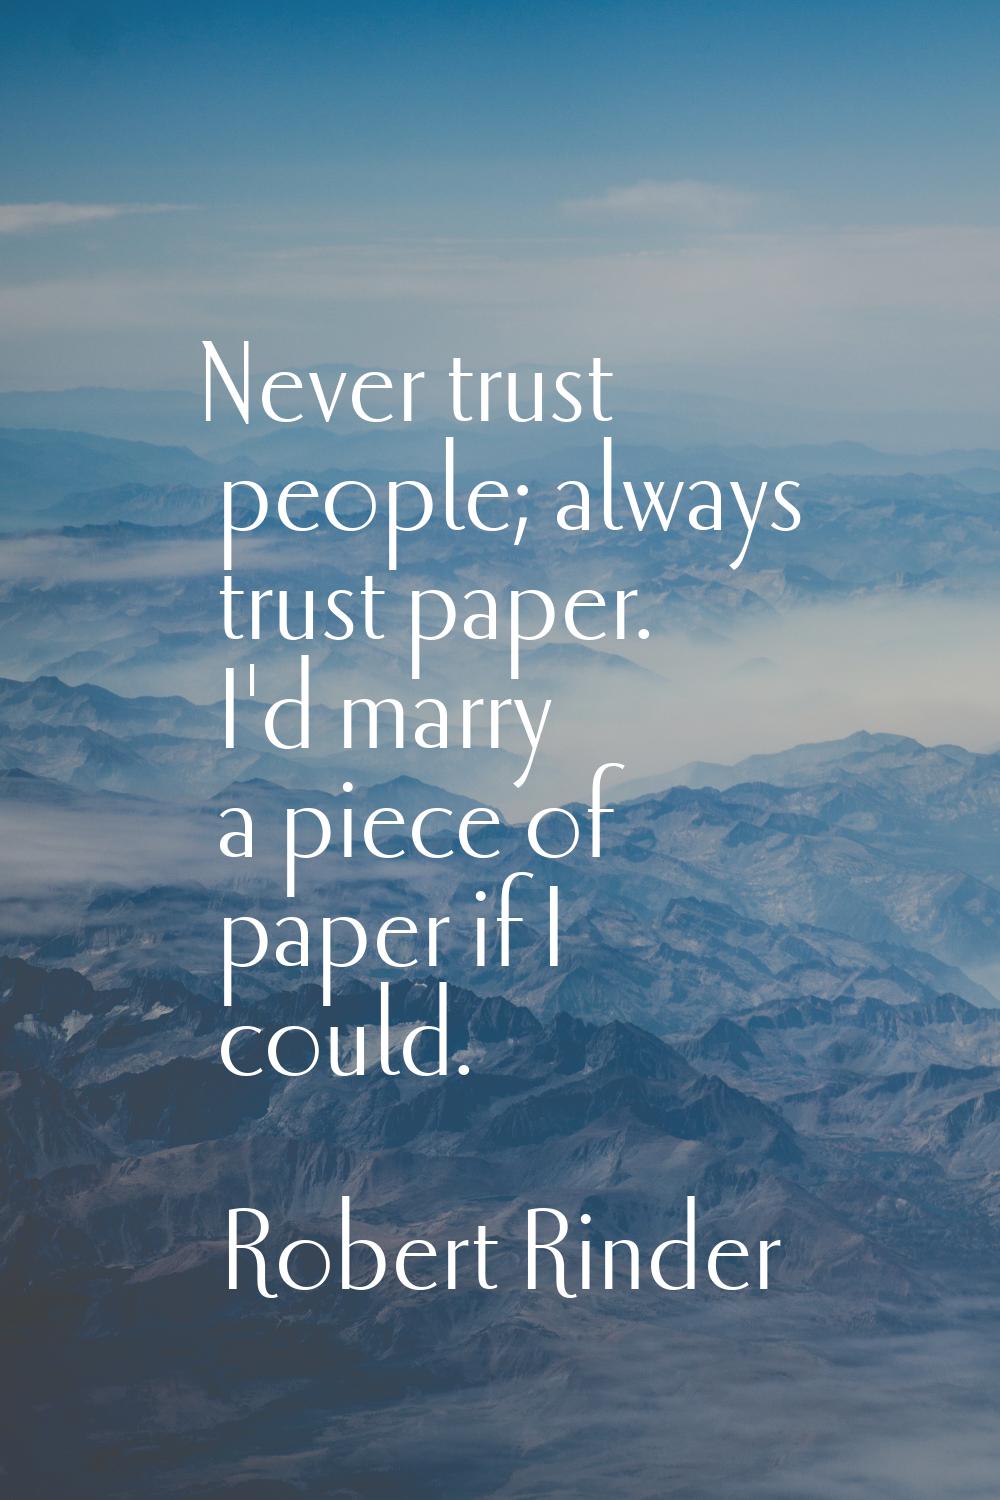 Never trust people; always trust paper. I'd marry a piece of paper if I could.